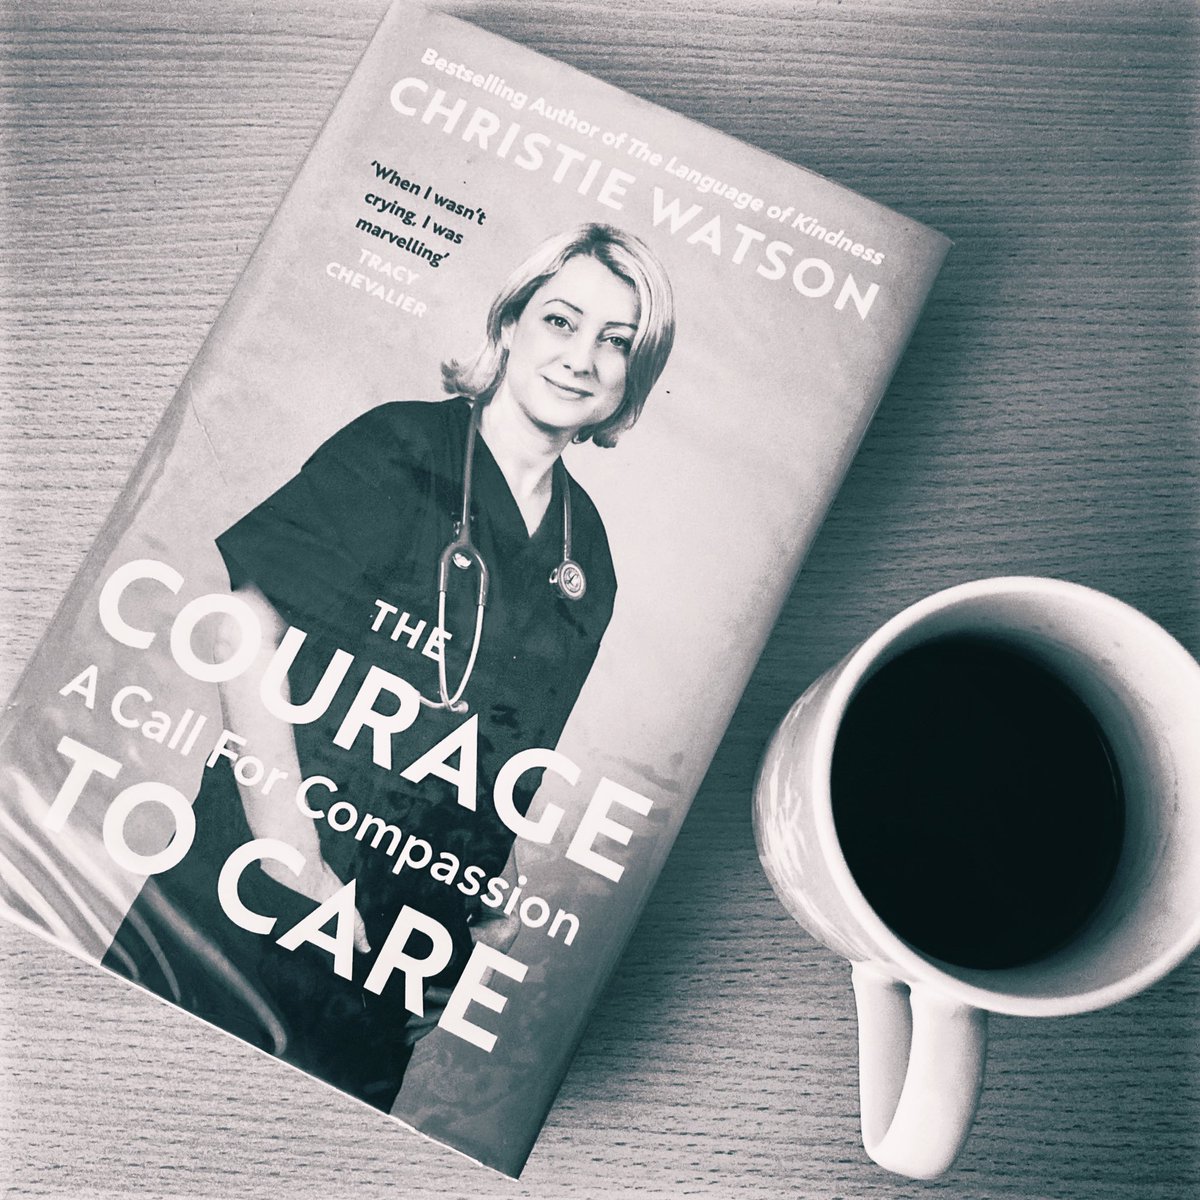 Coffee with Christie Watson.

Compassion is how we will be judged. And it is how we should be judged. This is a time for all of us to think about community, how delicate life is, and what life now means.

#christiewatson #compassion #covid_19